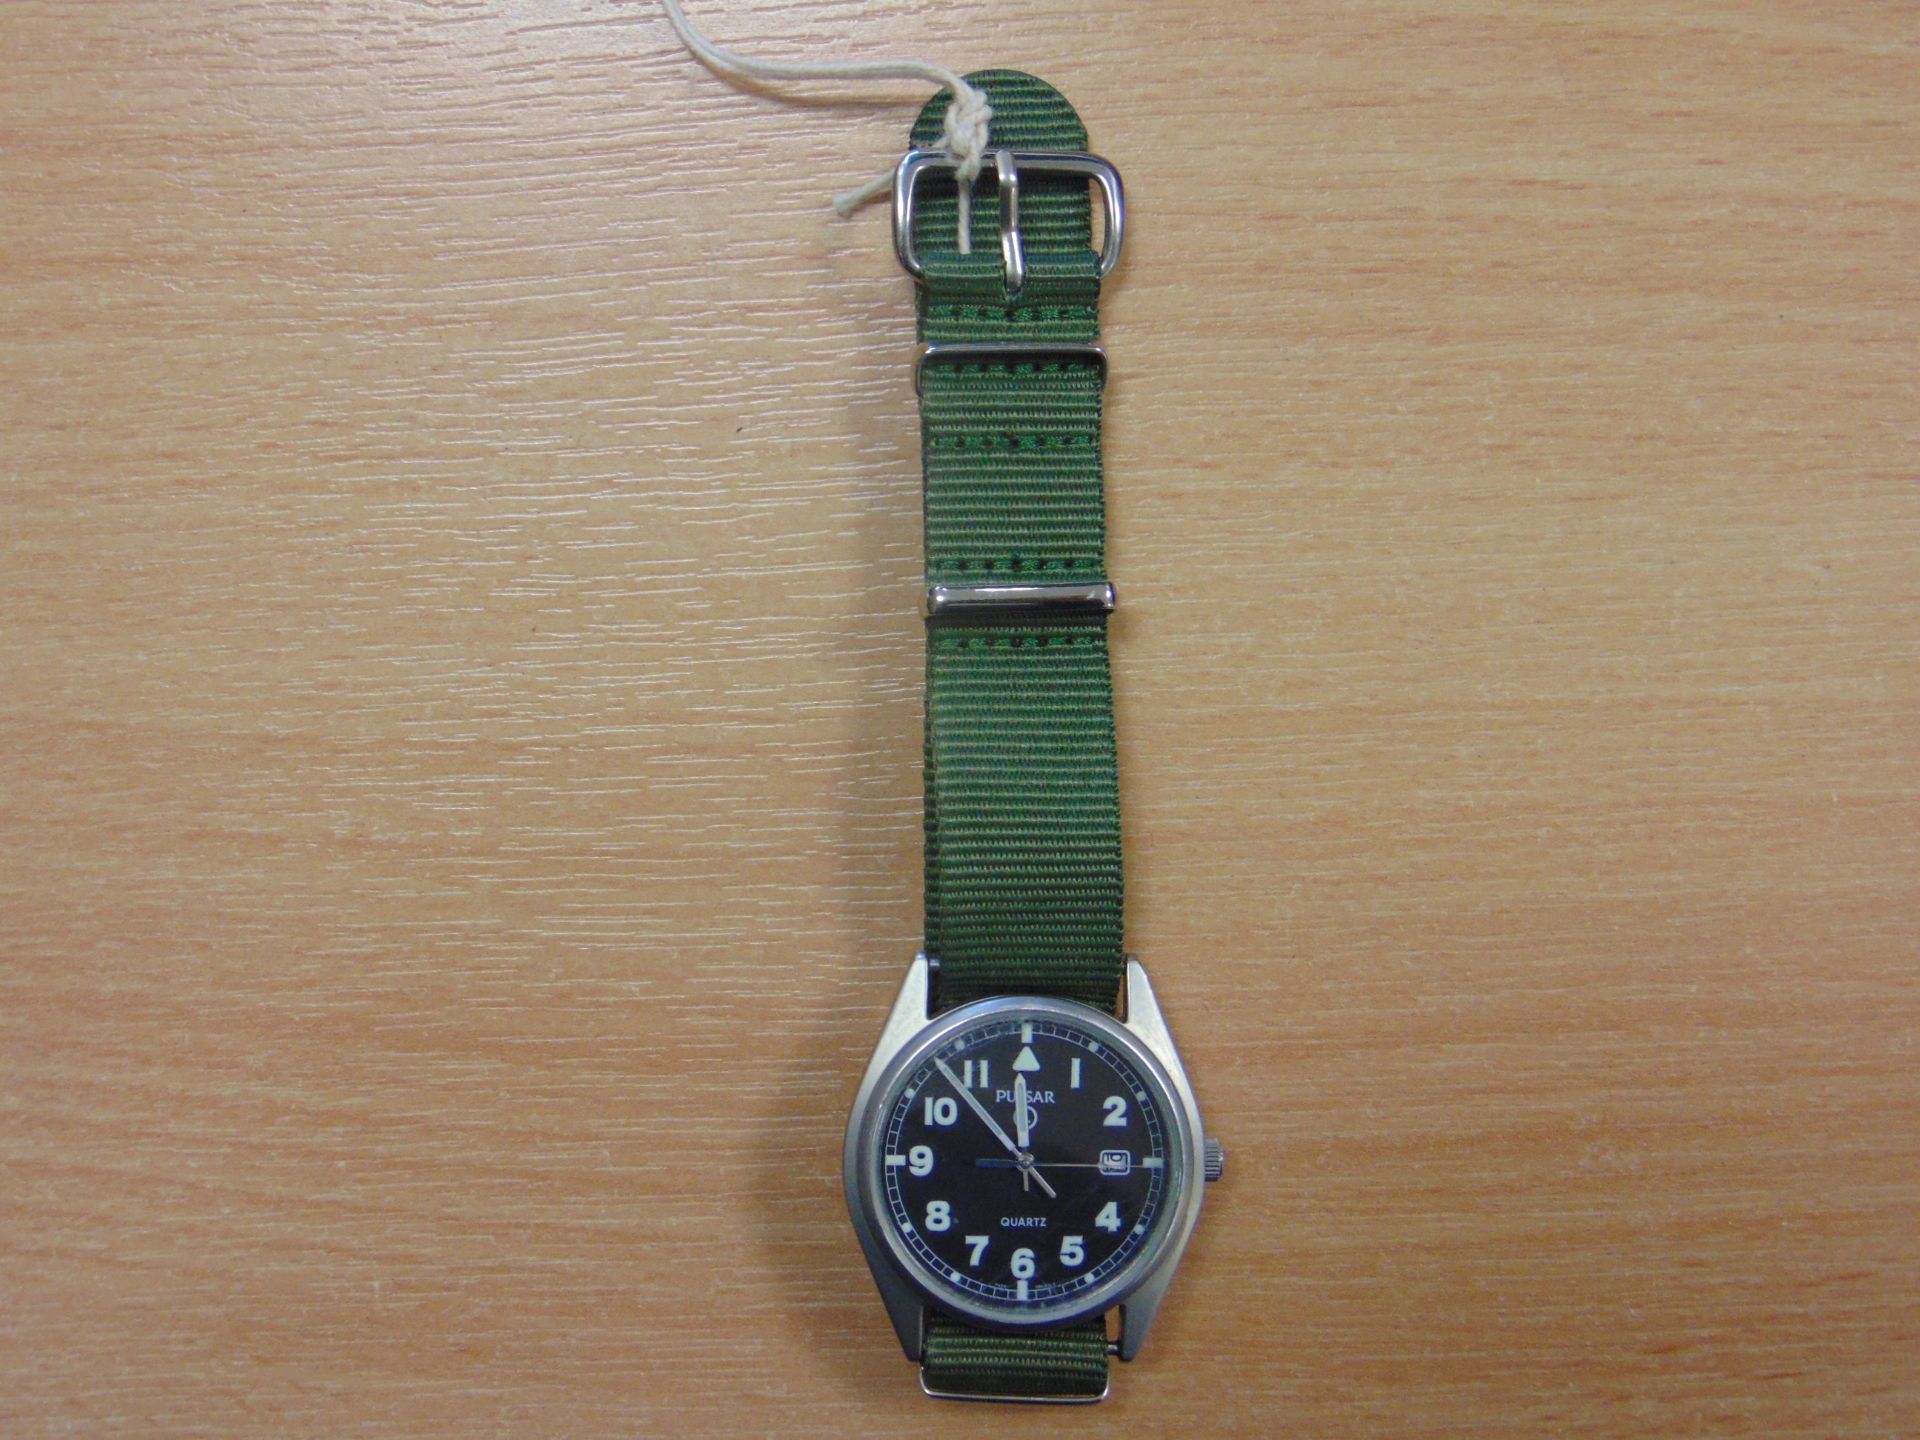 PULSAR W10 BRITISH ISSUE SERVICE WATCH NATO MARKINGS DATED 2004 - Image 2 of 12